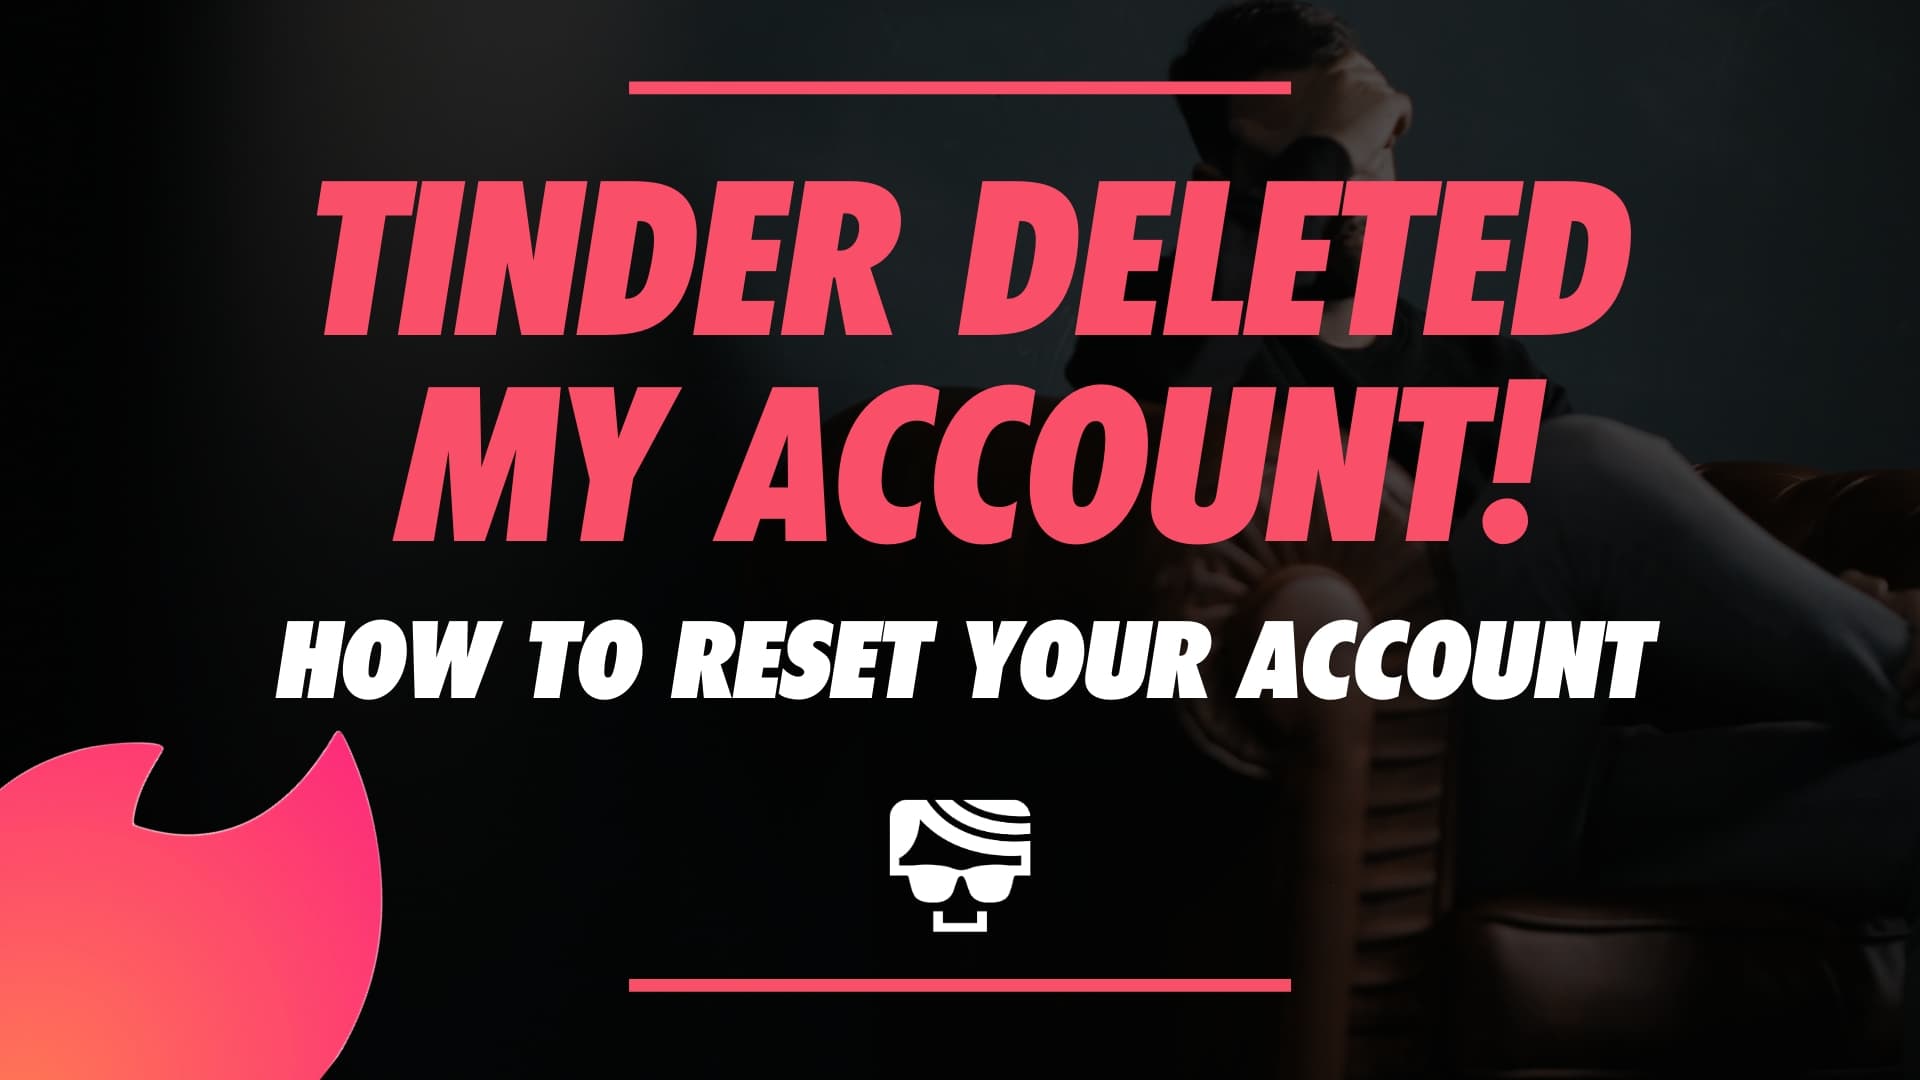 How to reset your tinder